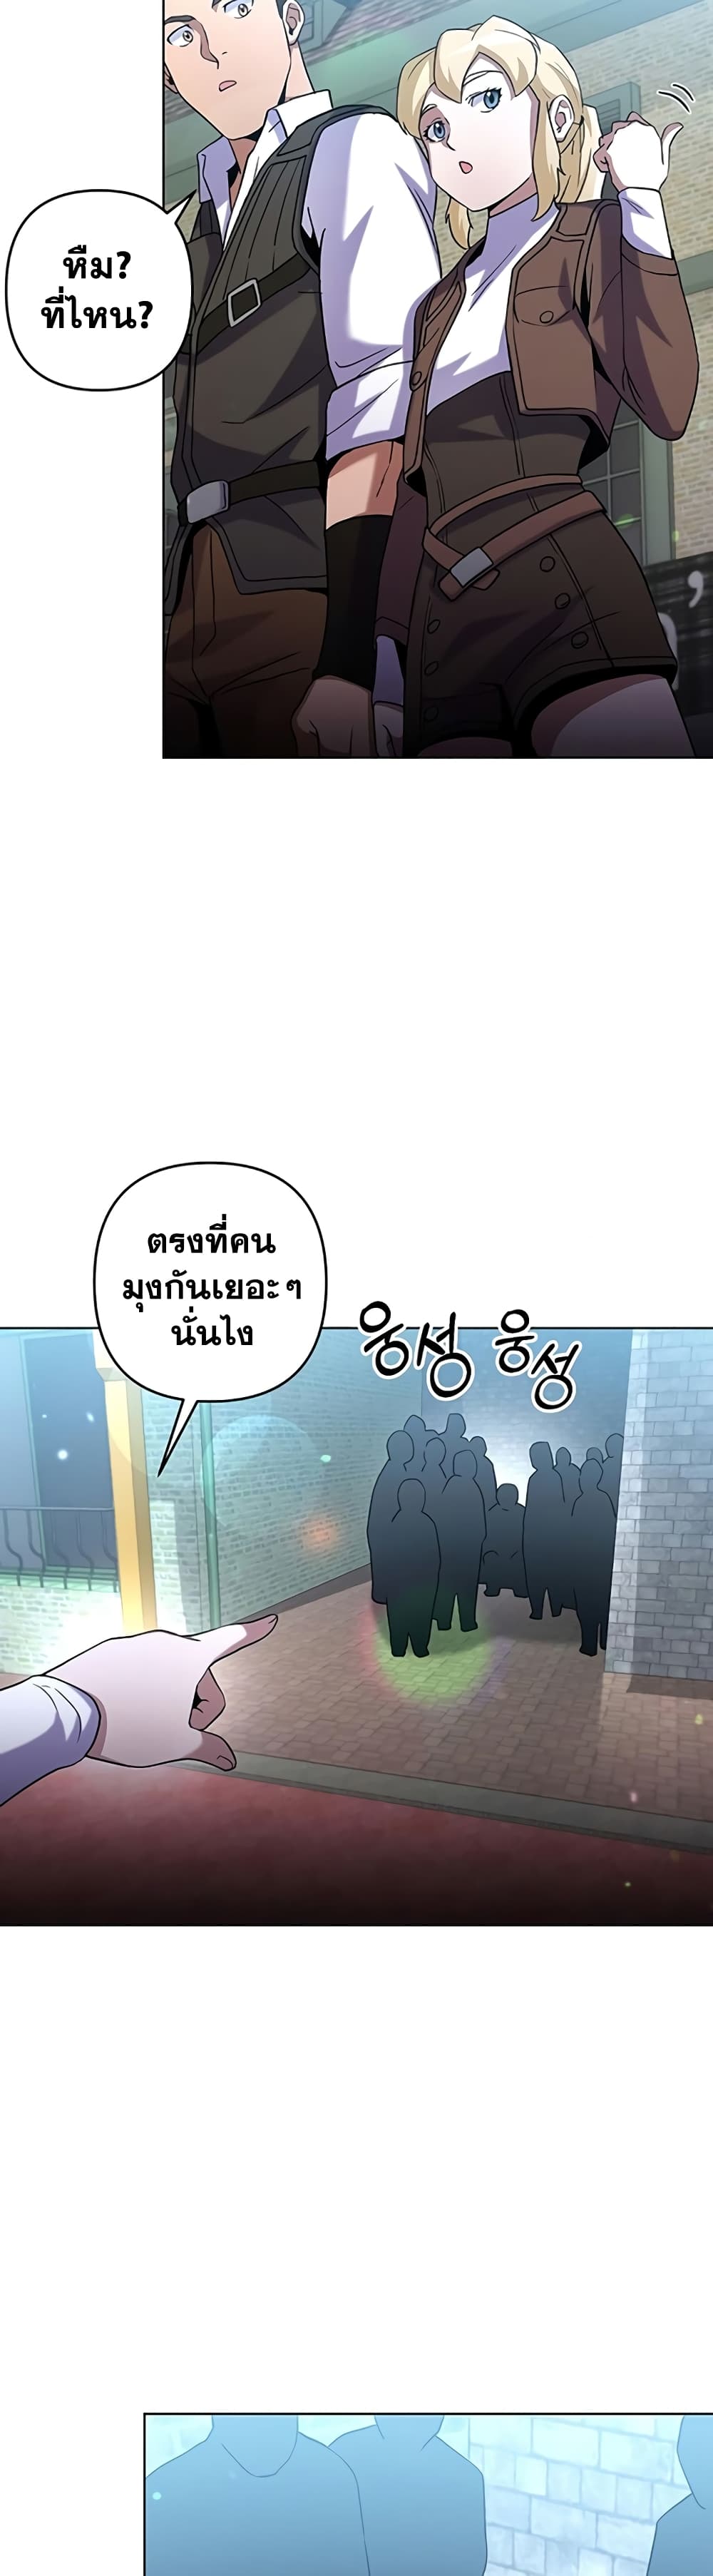 Surviving in an Action Manhwa 18 35